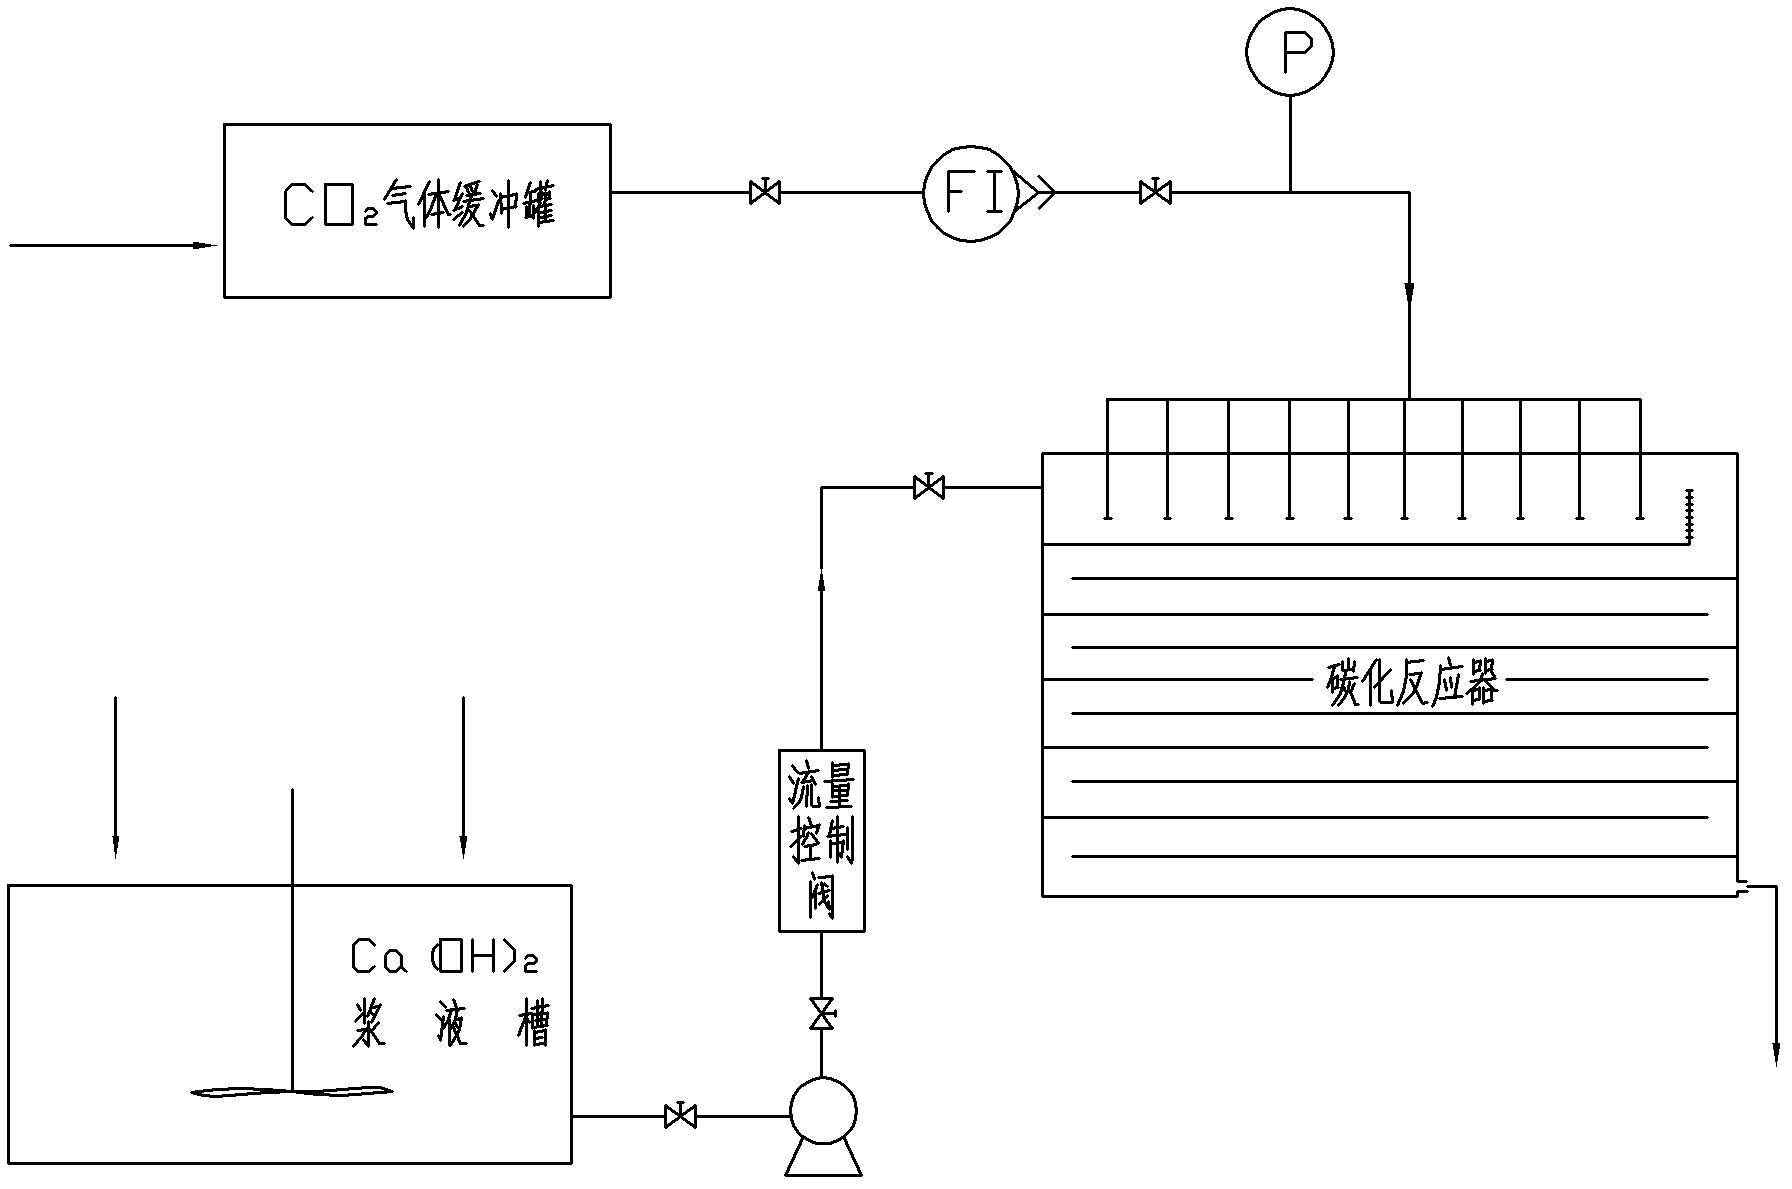 Carbonizer for continuously synthesizing calcium carbonate and production method of calcium carbonate